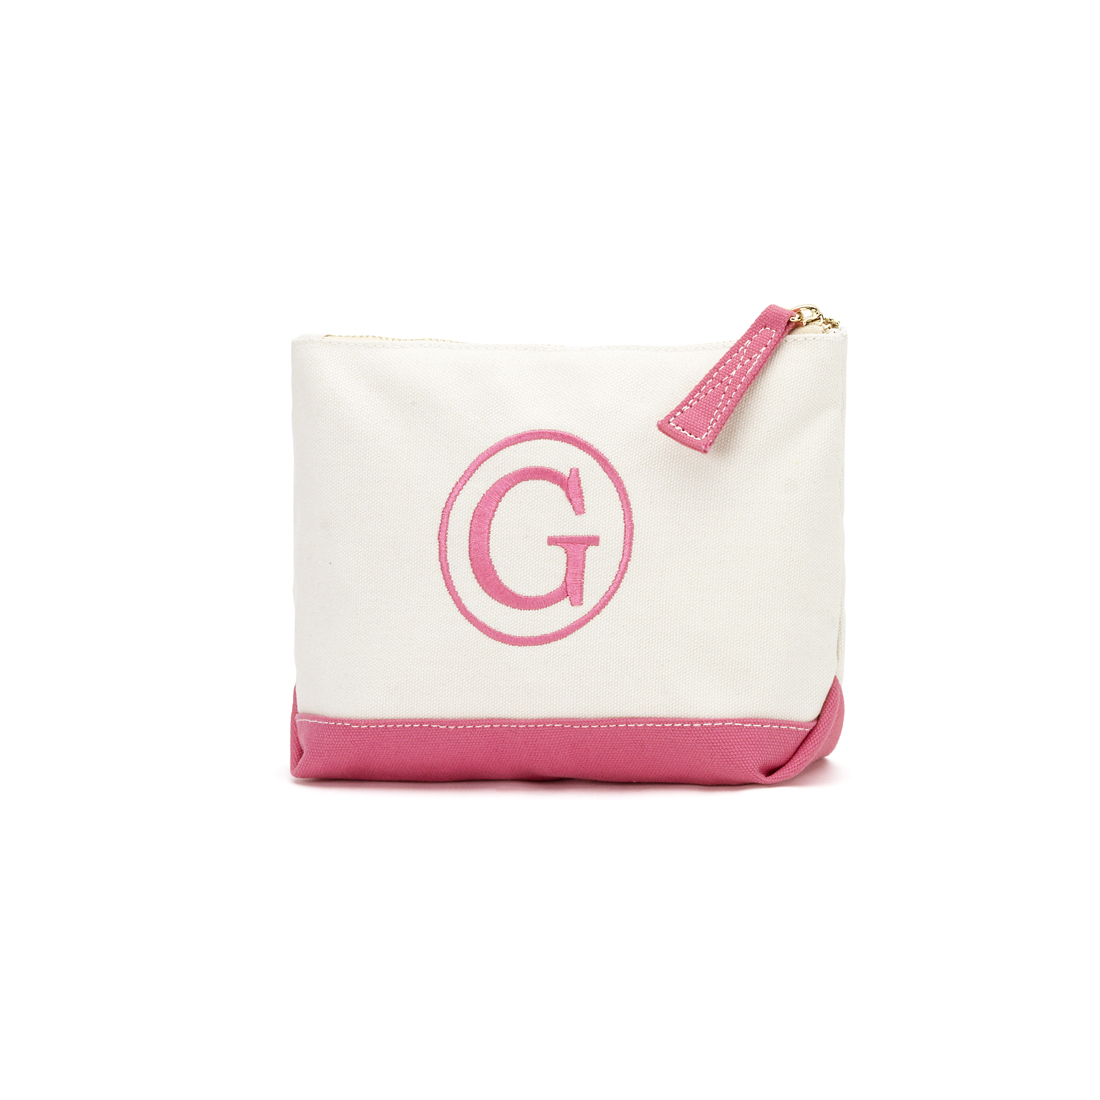 Monogrammed Canvas Cosmetic Bag in Hot Pink by Monogram Boutique